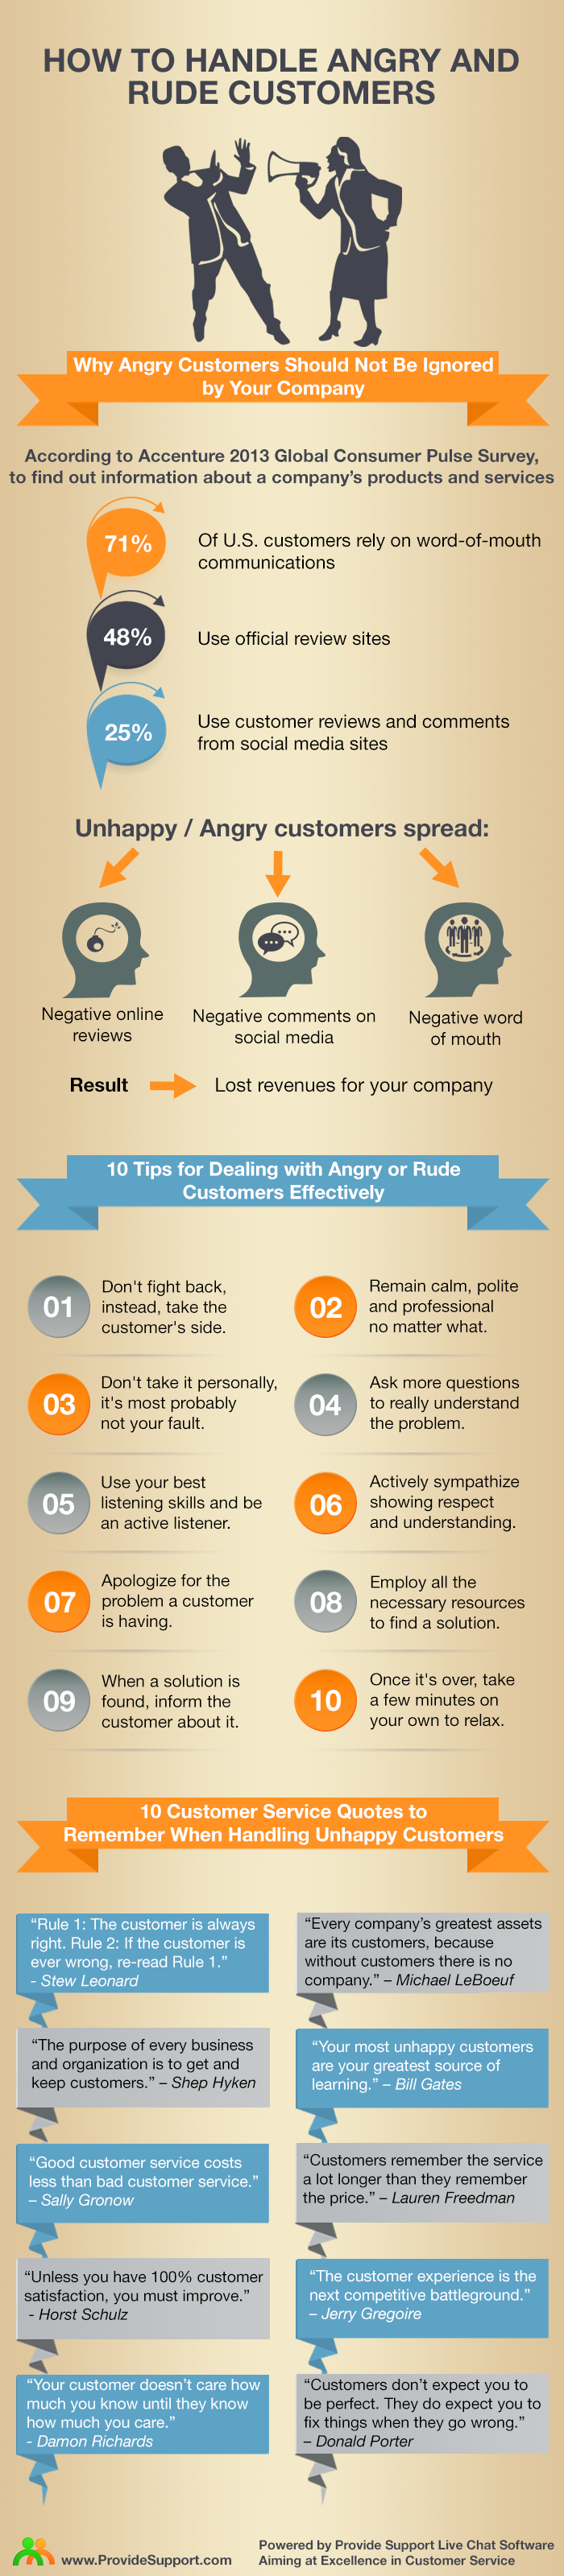 How to Handle Angry Customers